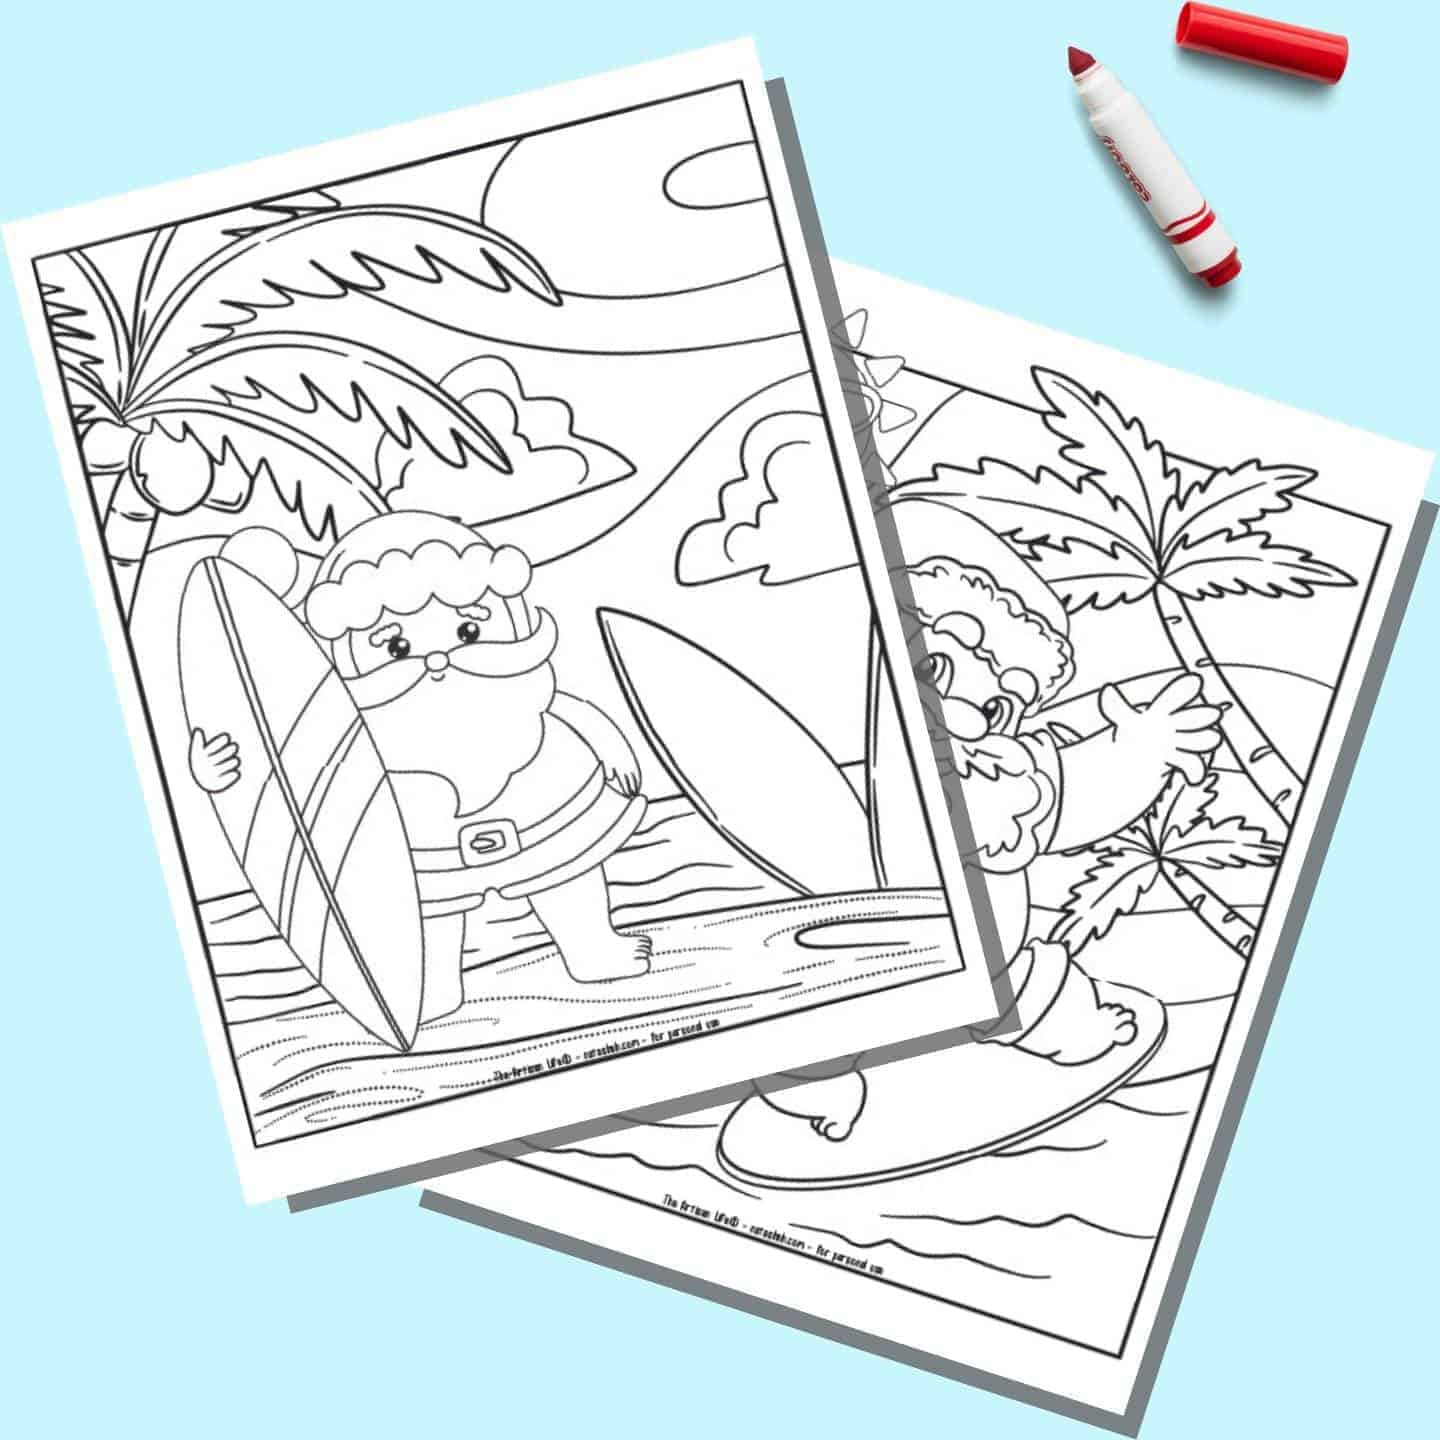 25+ surfboard coloring pages